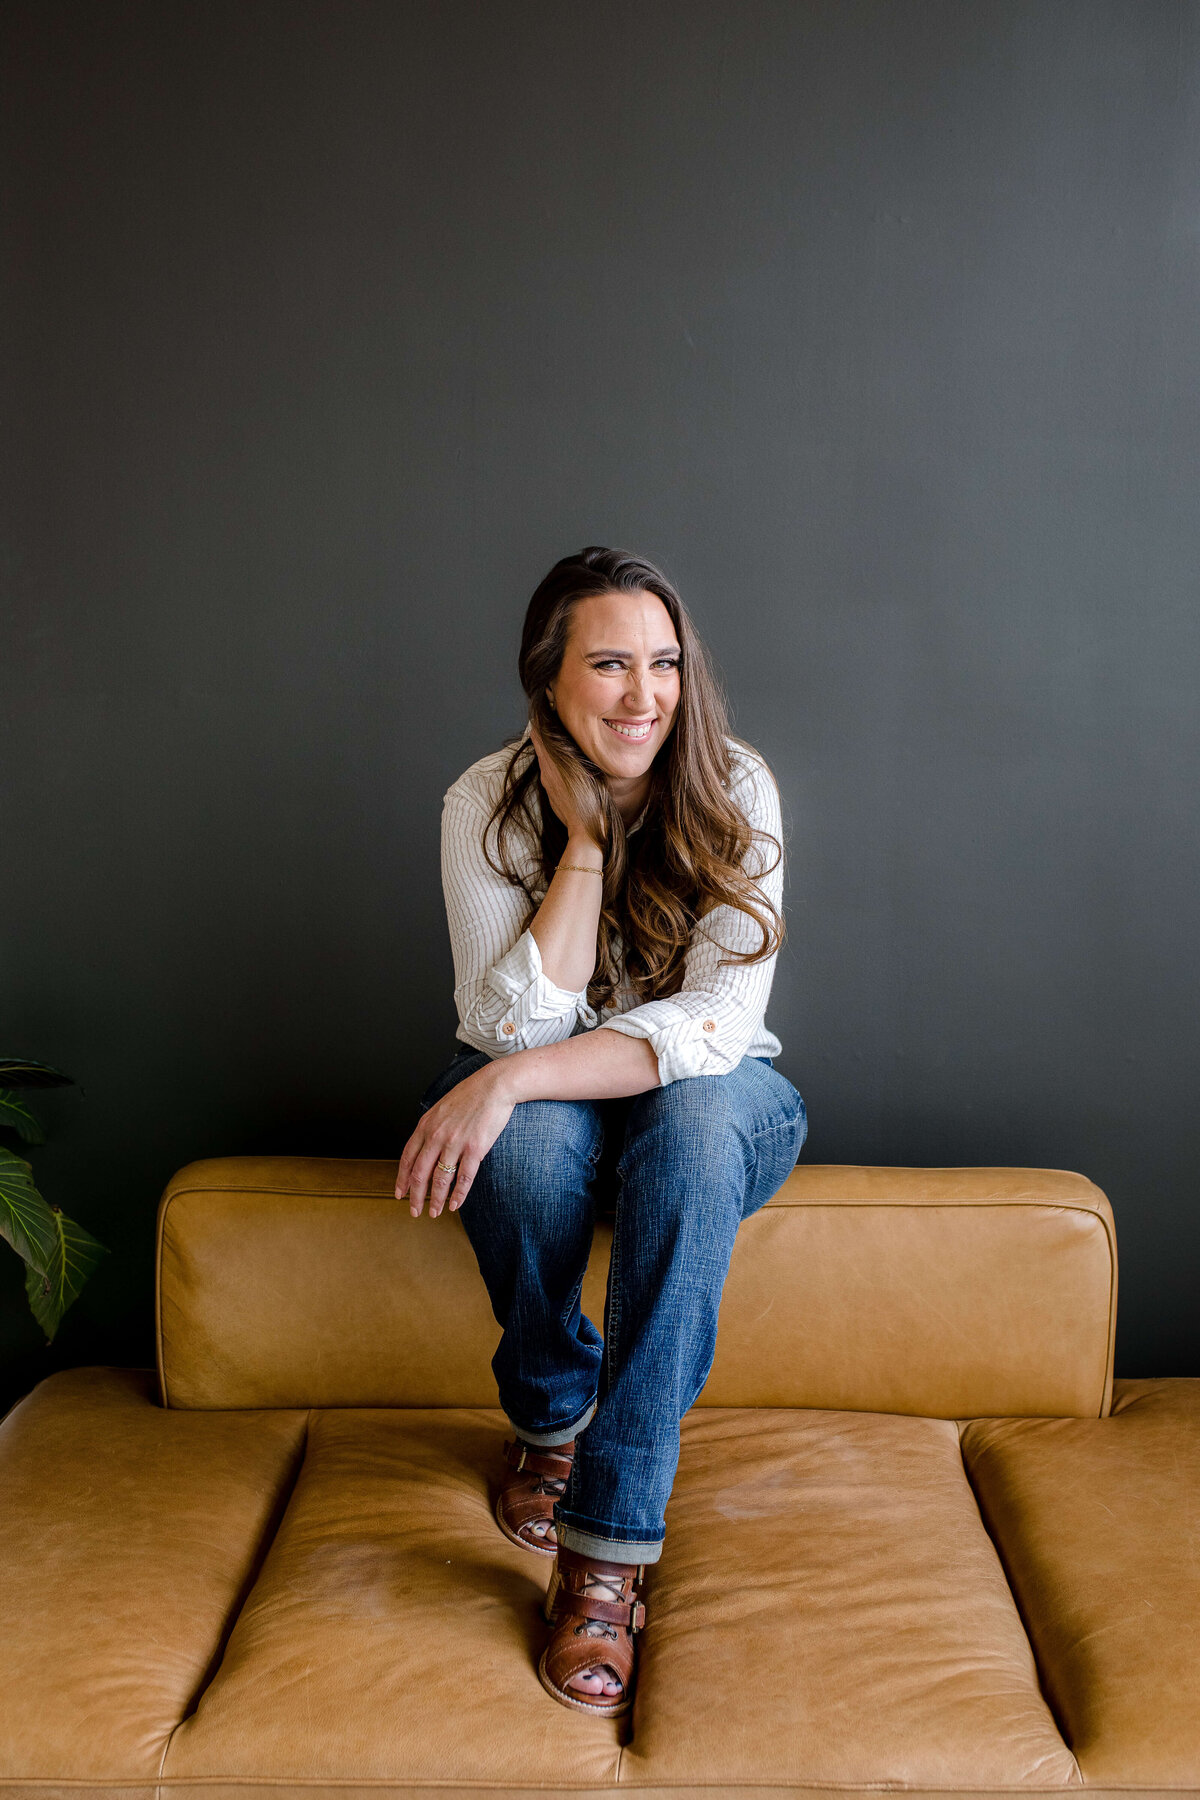 Orlando photographer photographs woman sitting on the back of a camel leather couch with her arms crossed smiling for brand photography